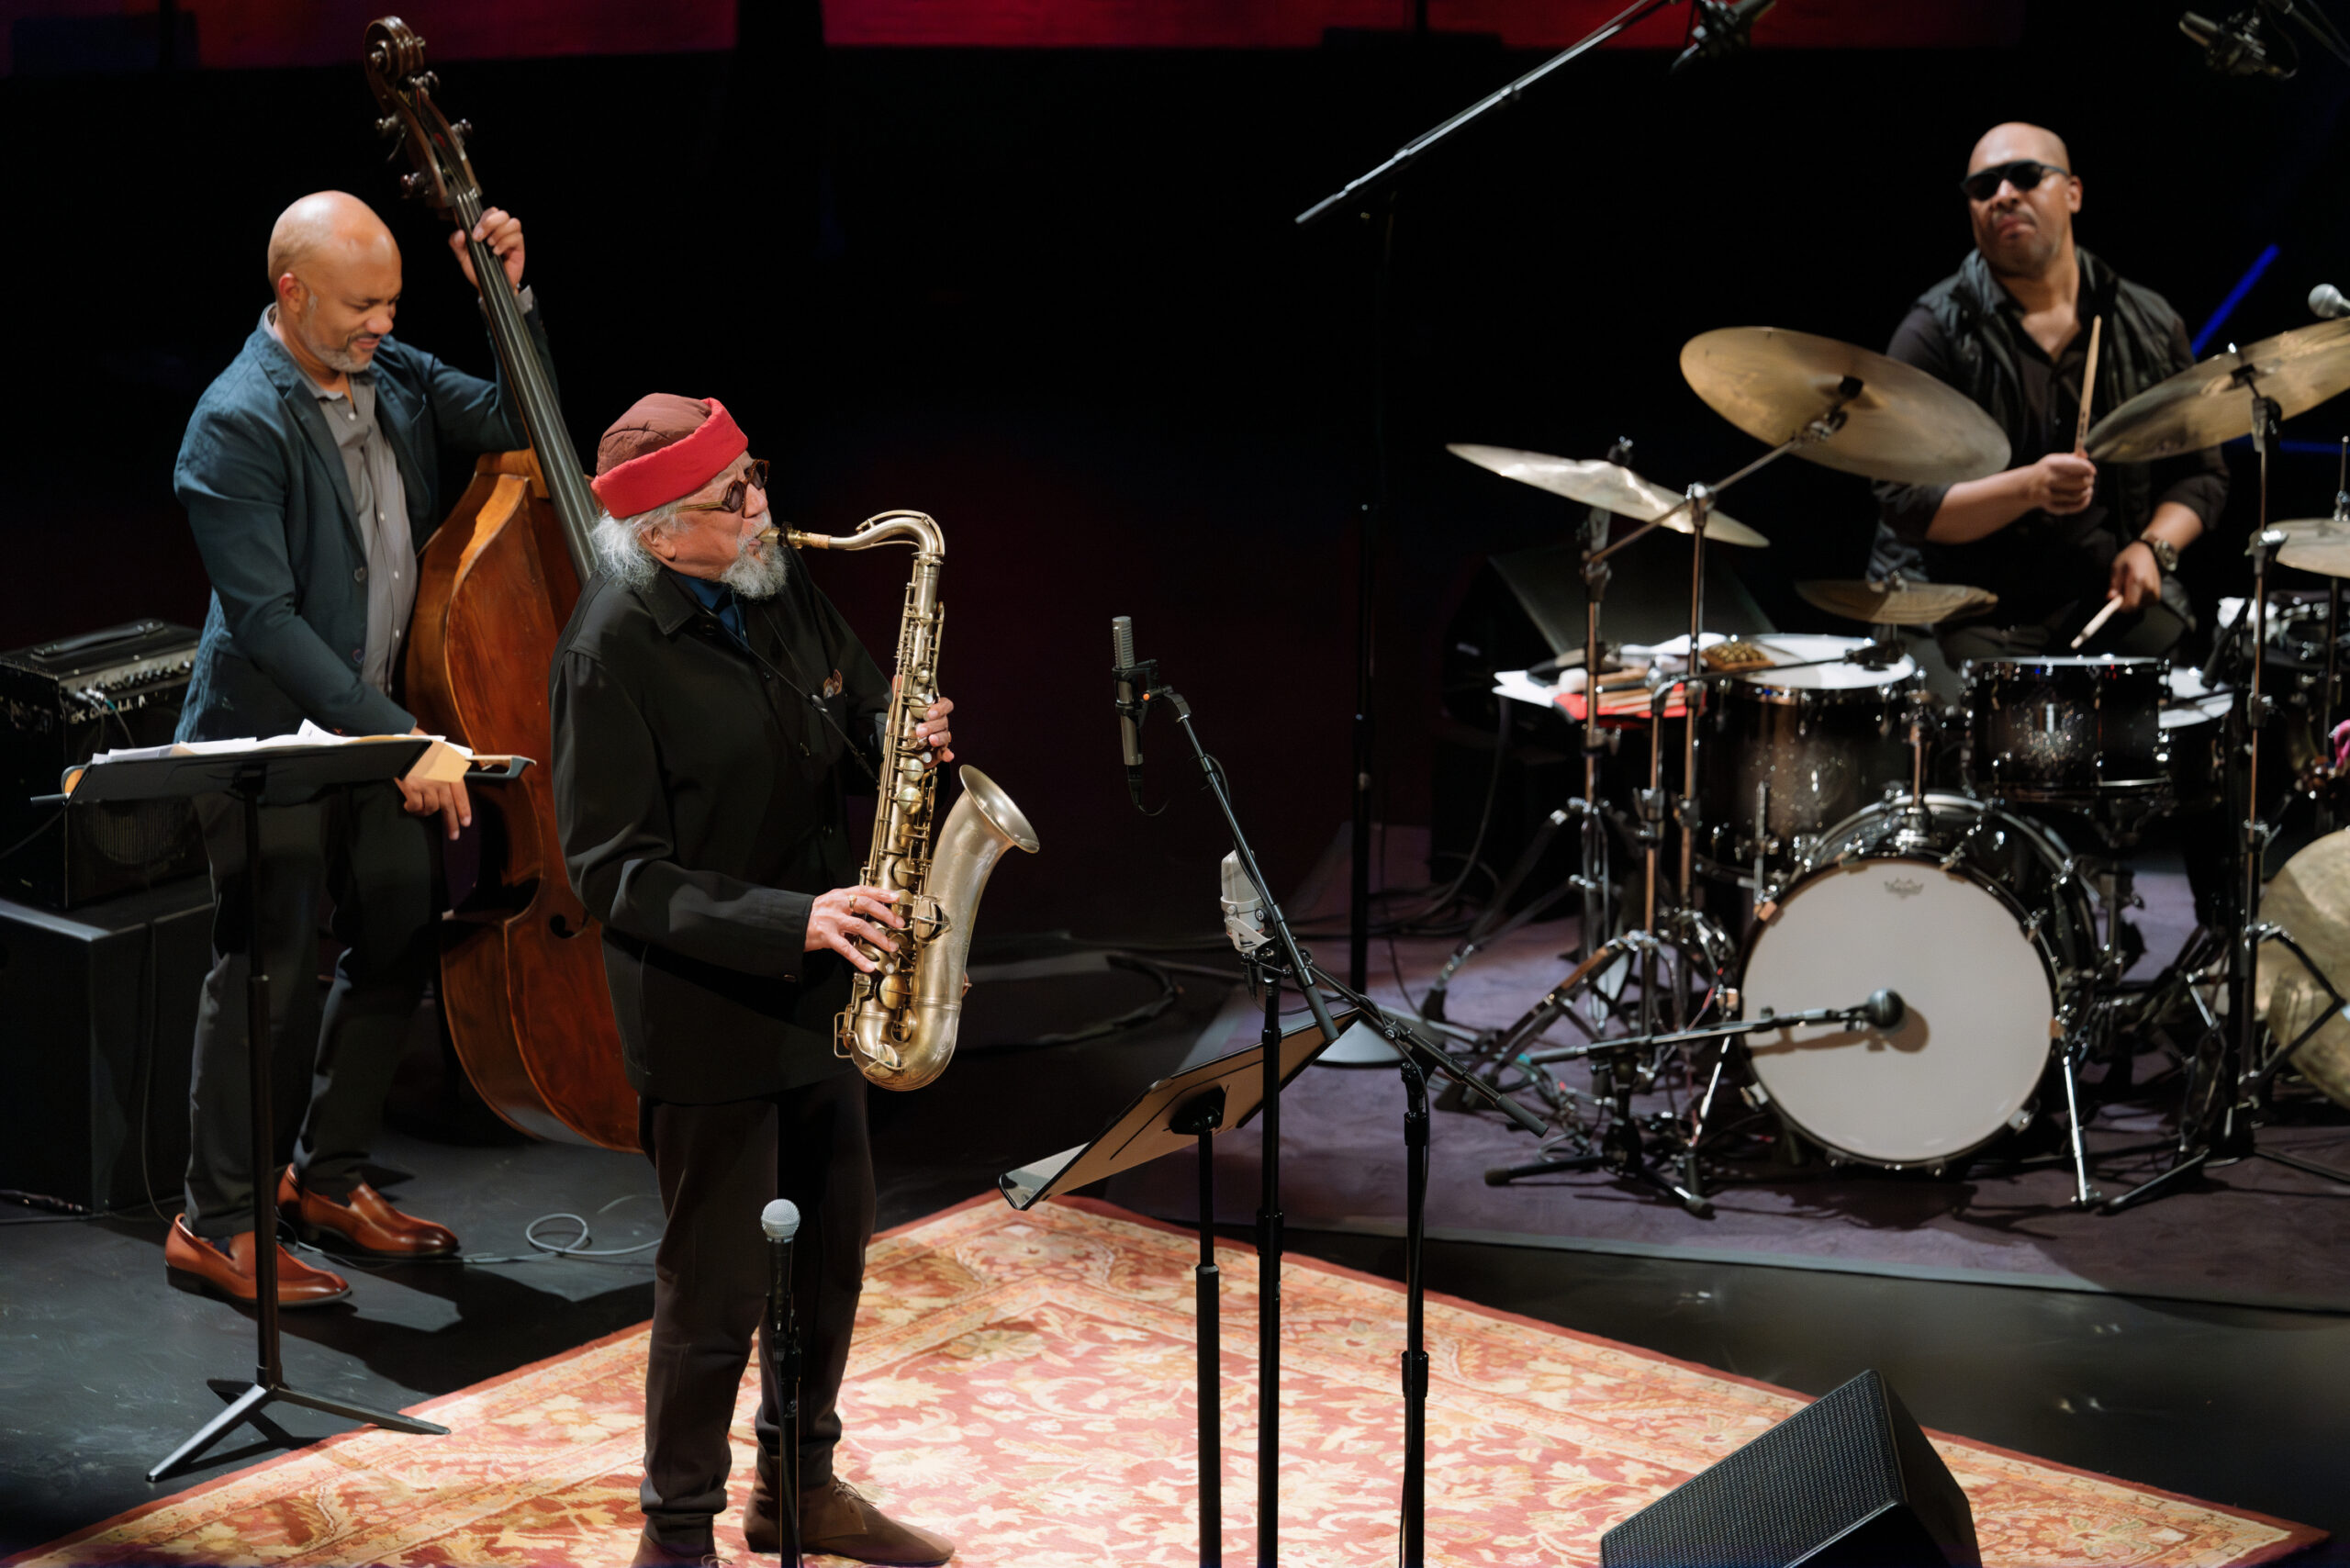 Three men onstage playing saxophone, bass and drums.